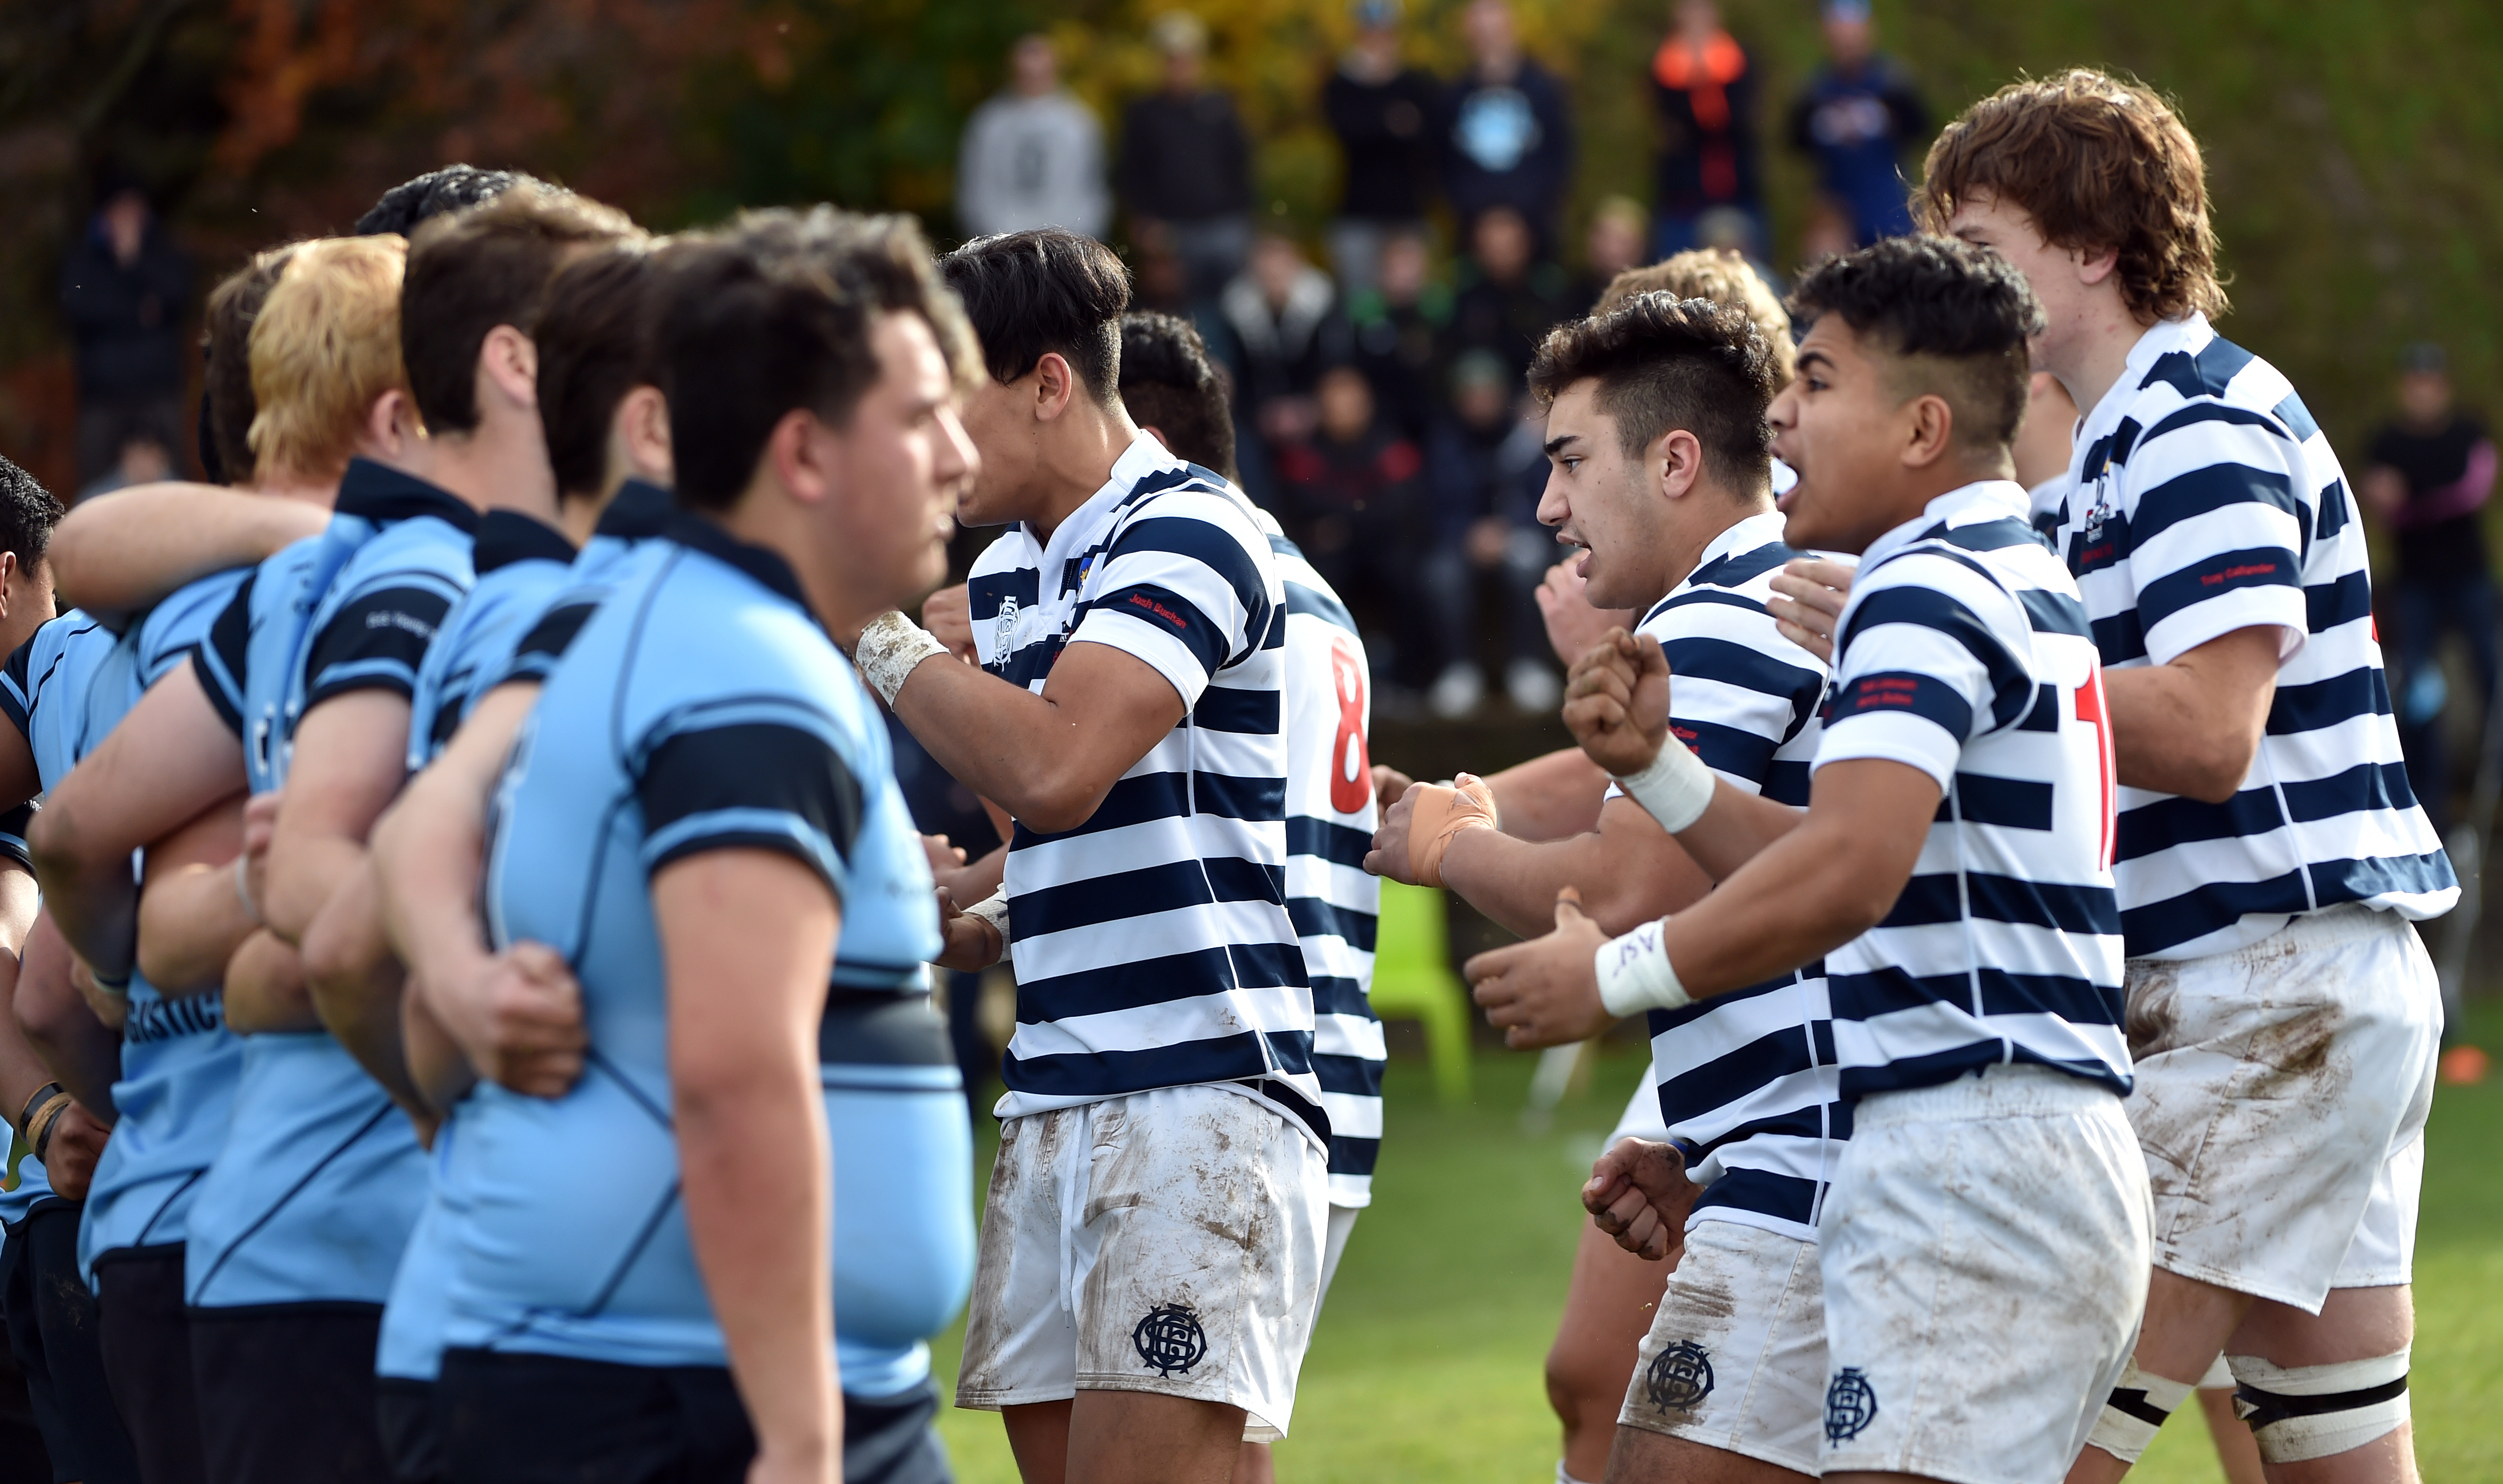 Three Obhs First Xv Players Suspended Otago Daily Times Online News